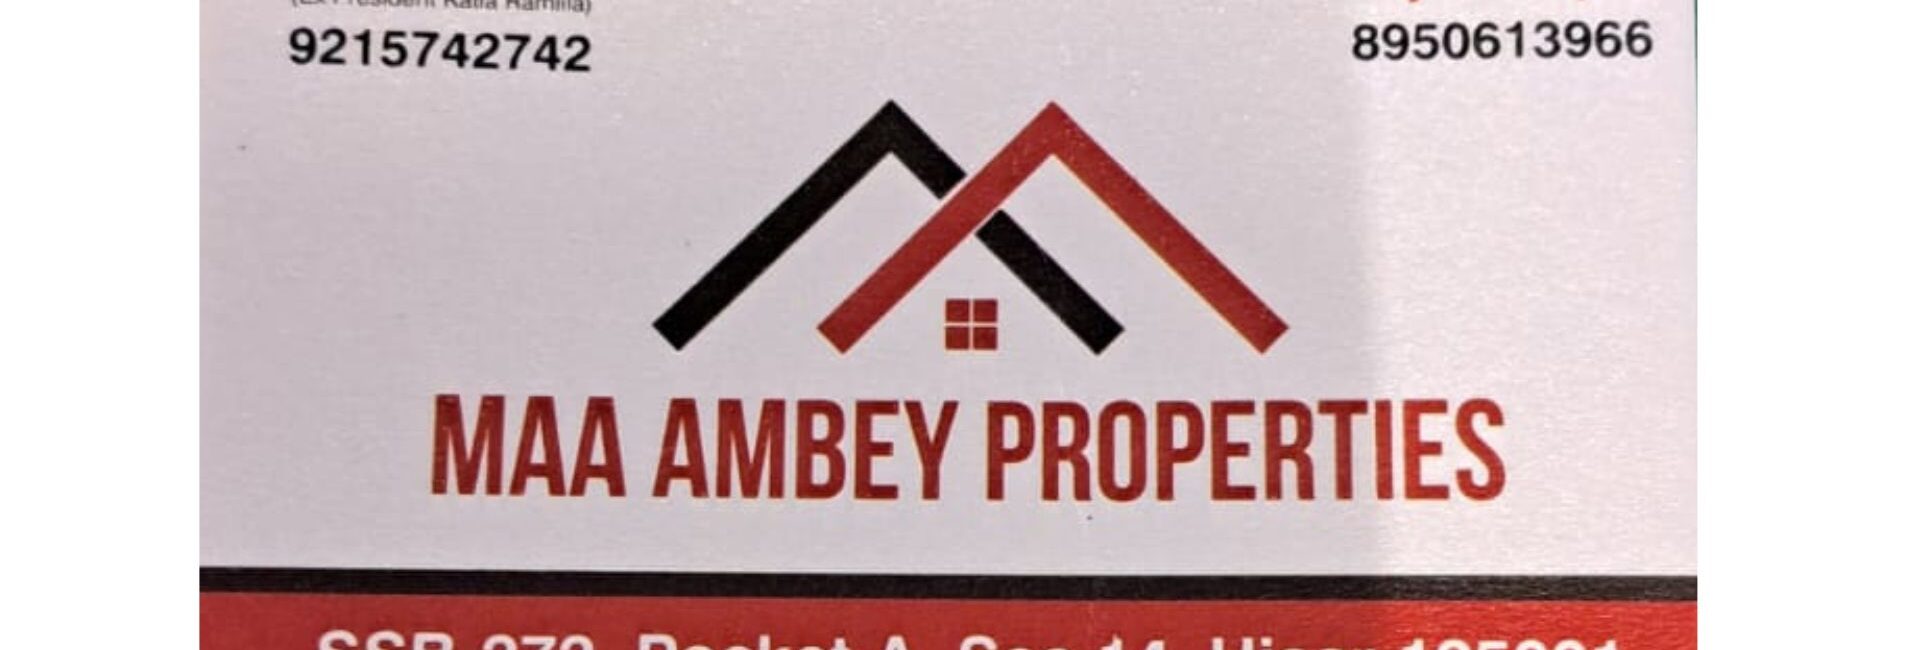 Maa Ambey Properties - Real Estate Agent in Hisar